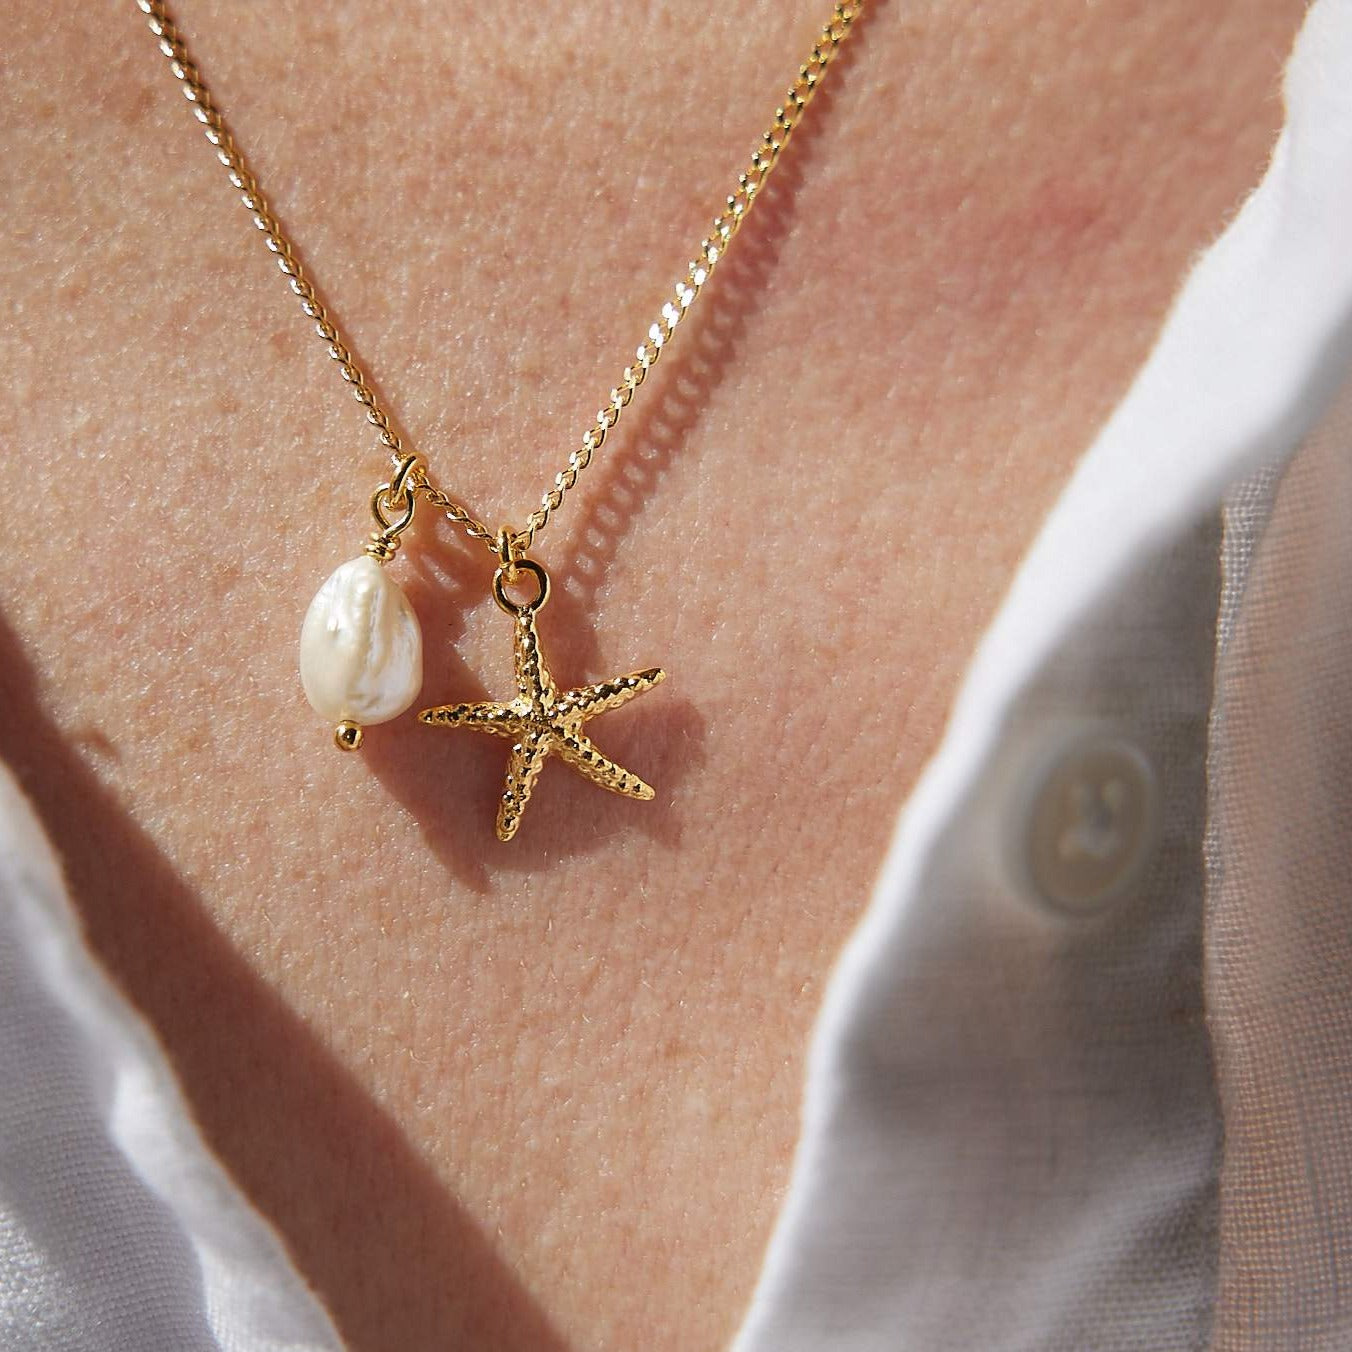 Starfish and freshwater pearl necklace 24k gold plated sterling silver